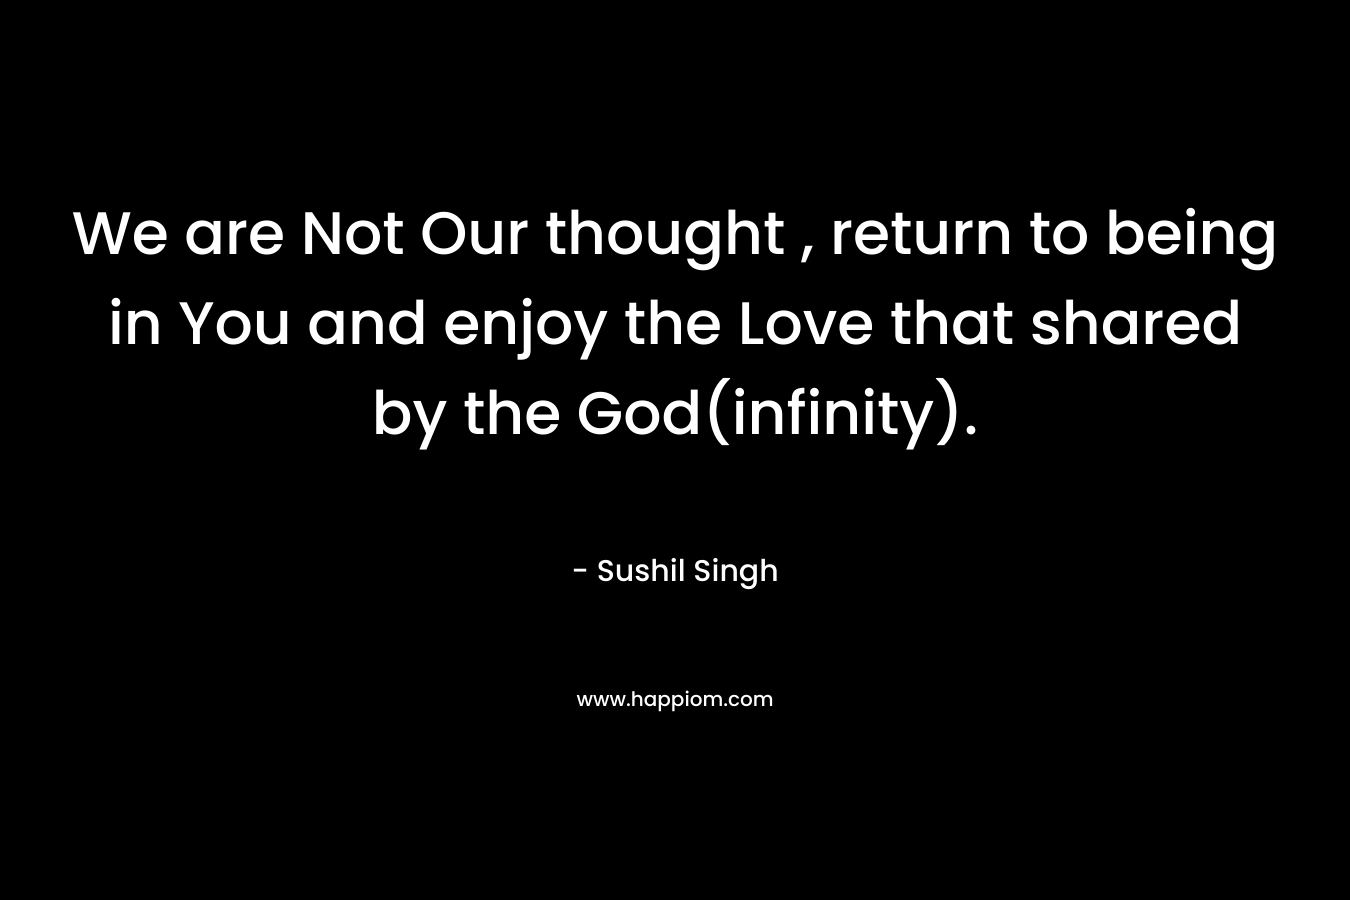 We are Not Our thought , return to being in You and enjoy the Love that shared by the God(infinity).